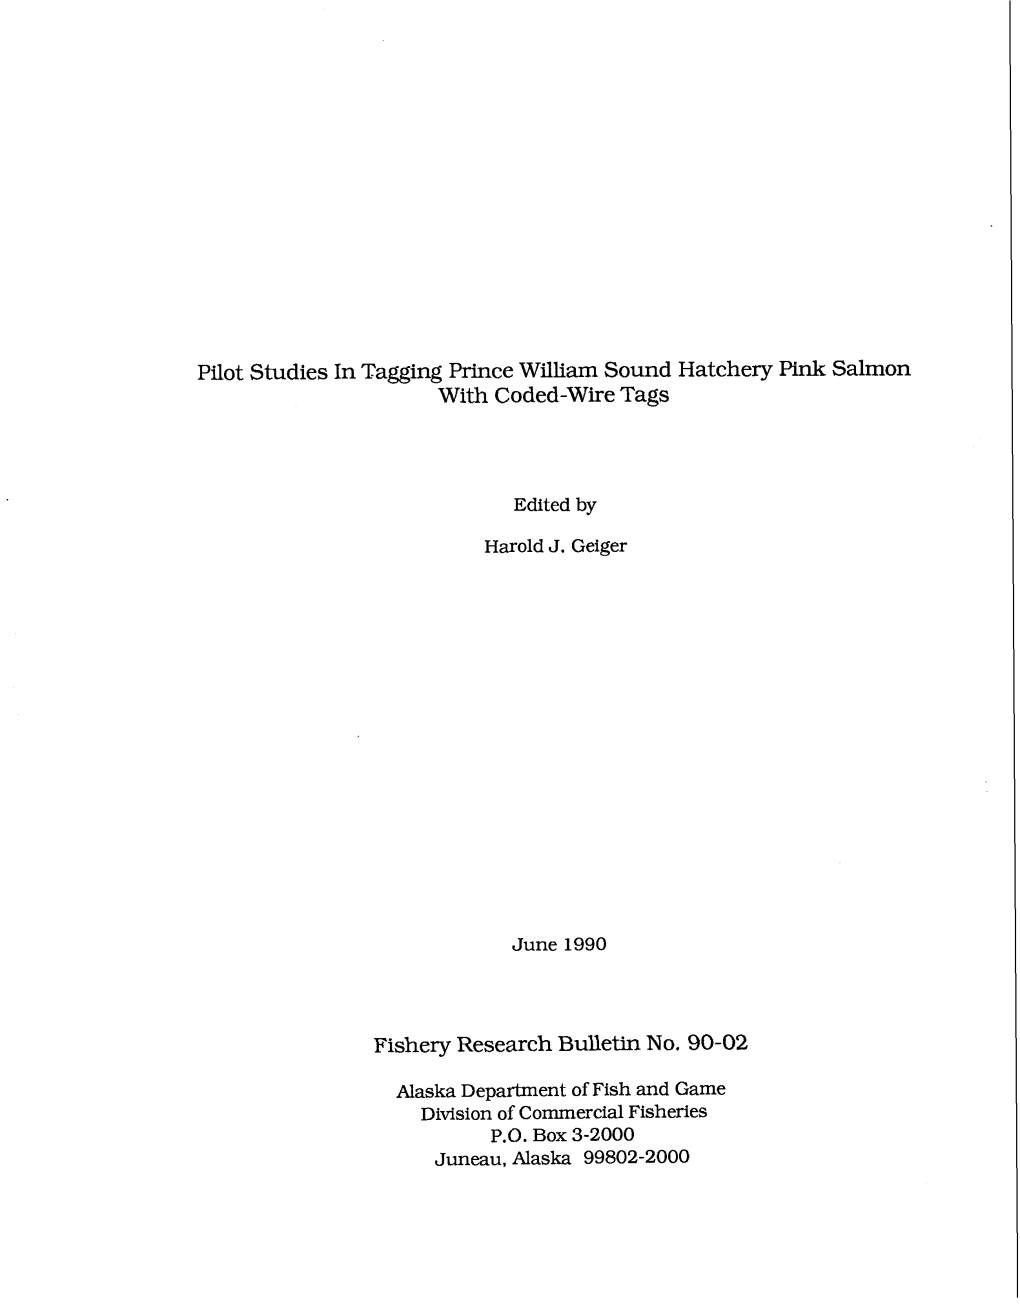 The 1988 Tag Study of Pink Salmon from the Solomon Gulch Hatchery in Prince William Sound